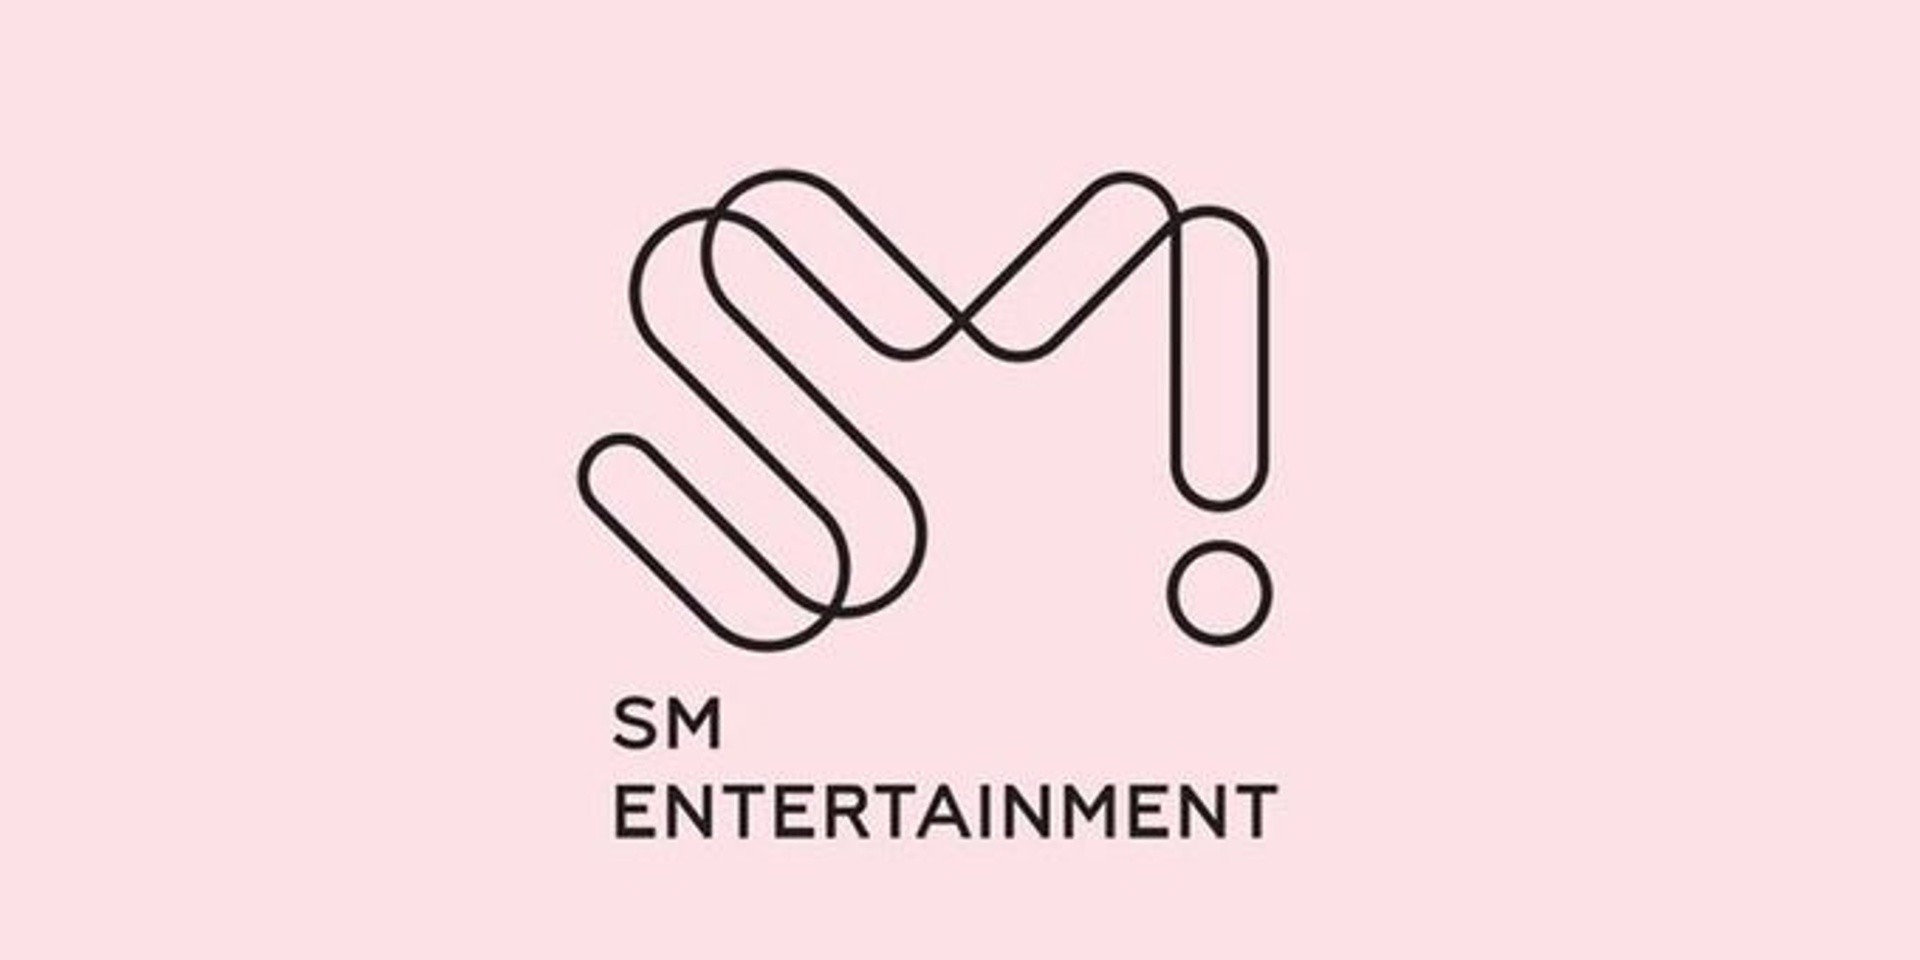 SM Entertainment sells nearly 18 million albums in 2021, led by NCT 127, NCT DREAM, EXO, Baekhyun, and NCT